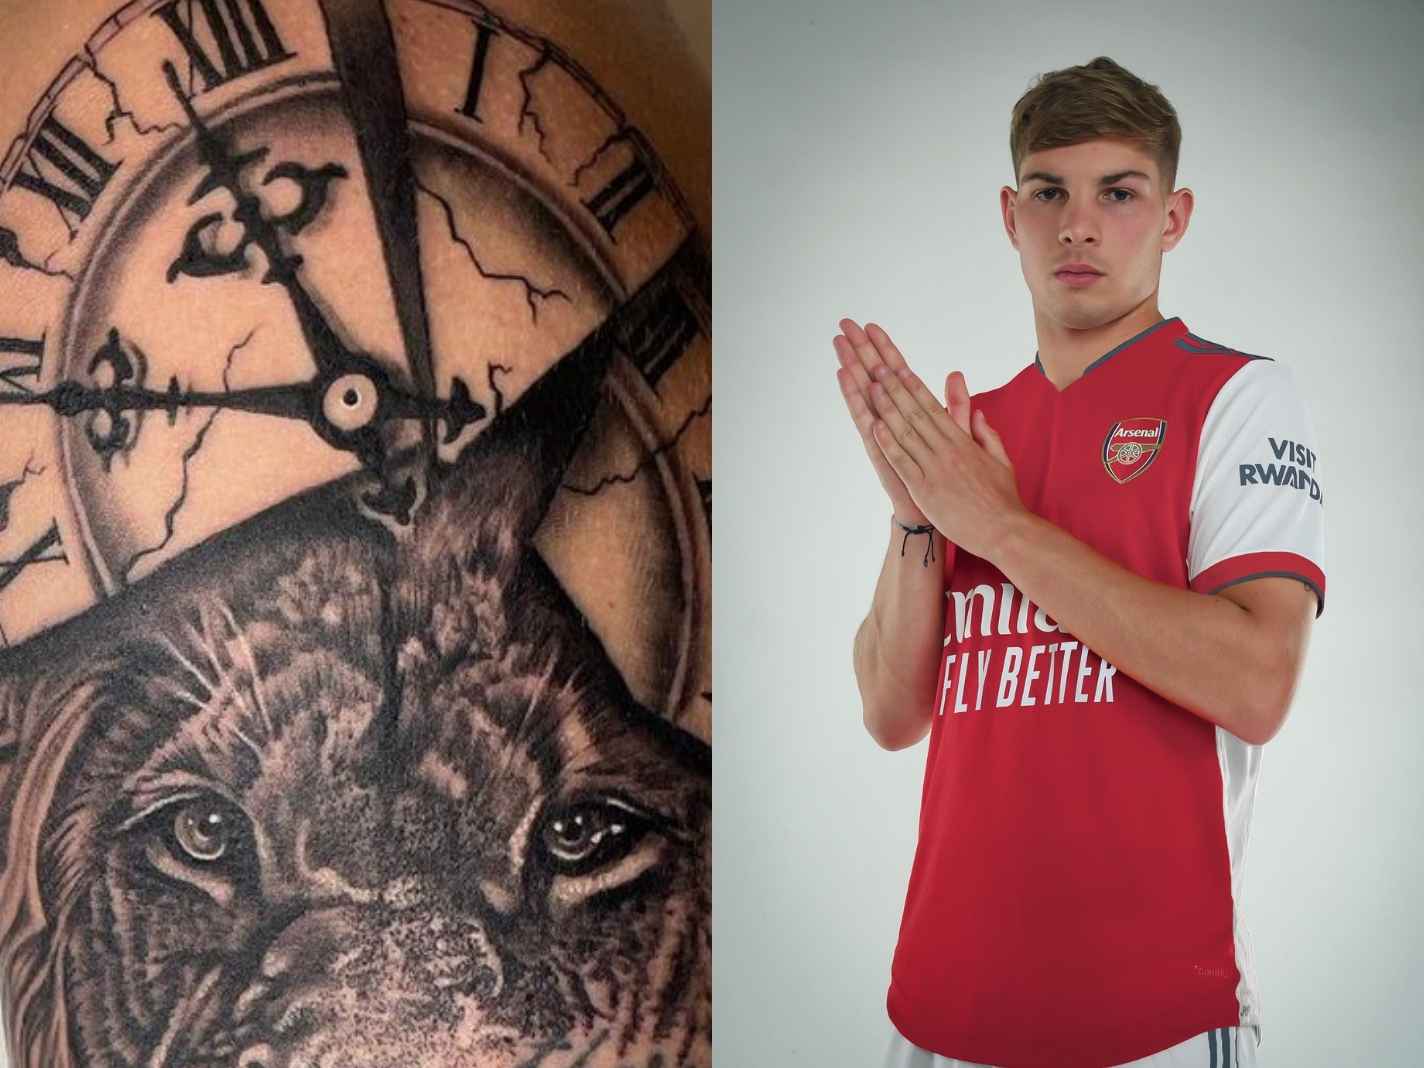 The broken clock tattoo on Emile Smith Rowe’s arm is a Nancy Drew reference